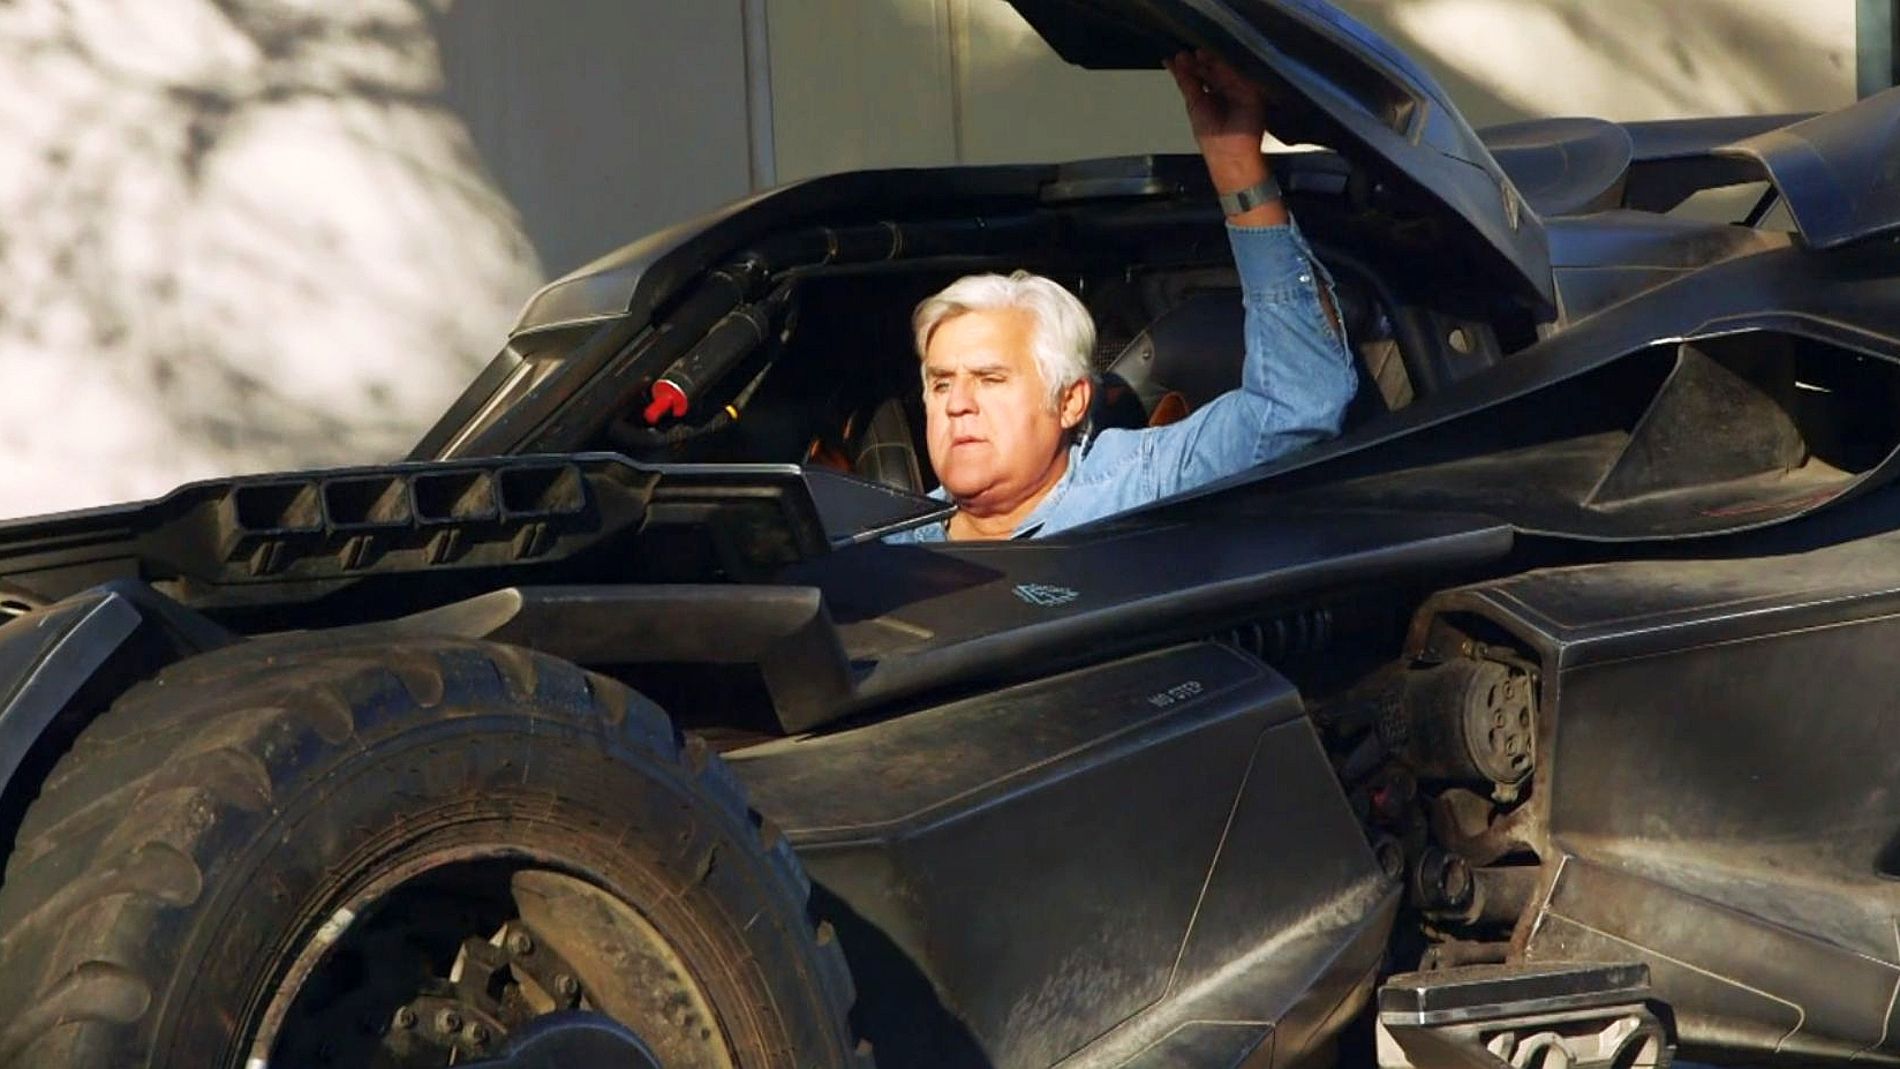 Here's What Really Impressed Jay Leno About Batman's Tumbler